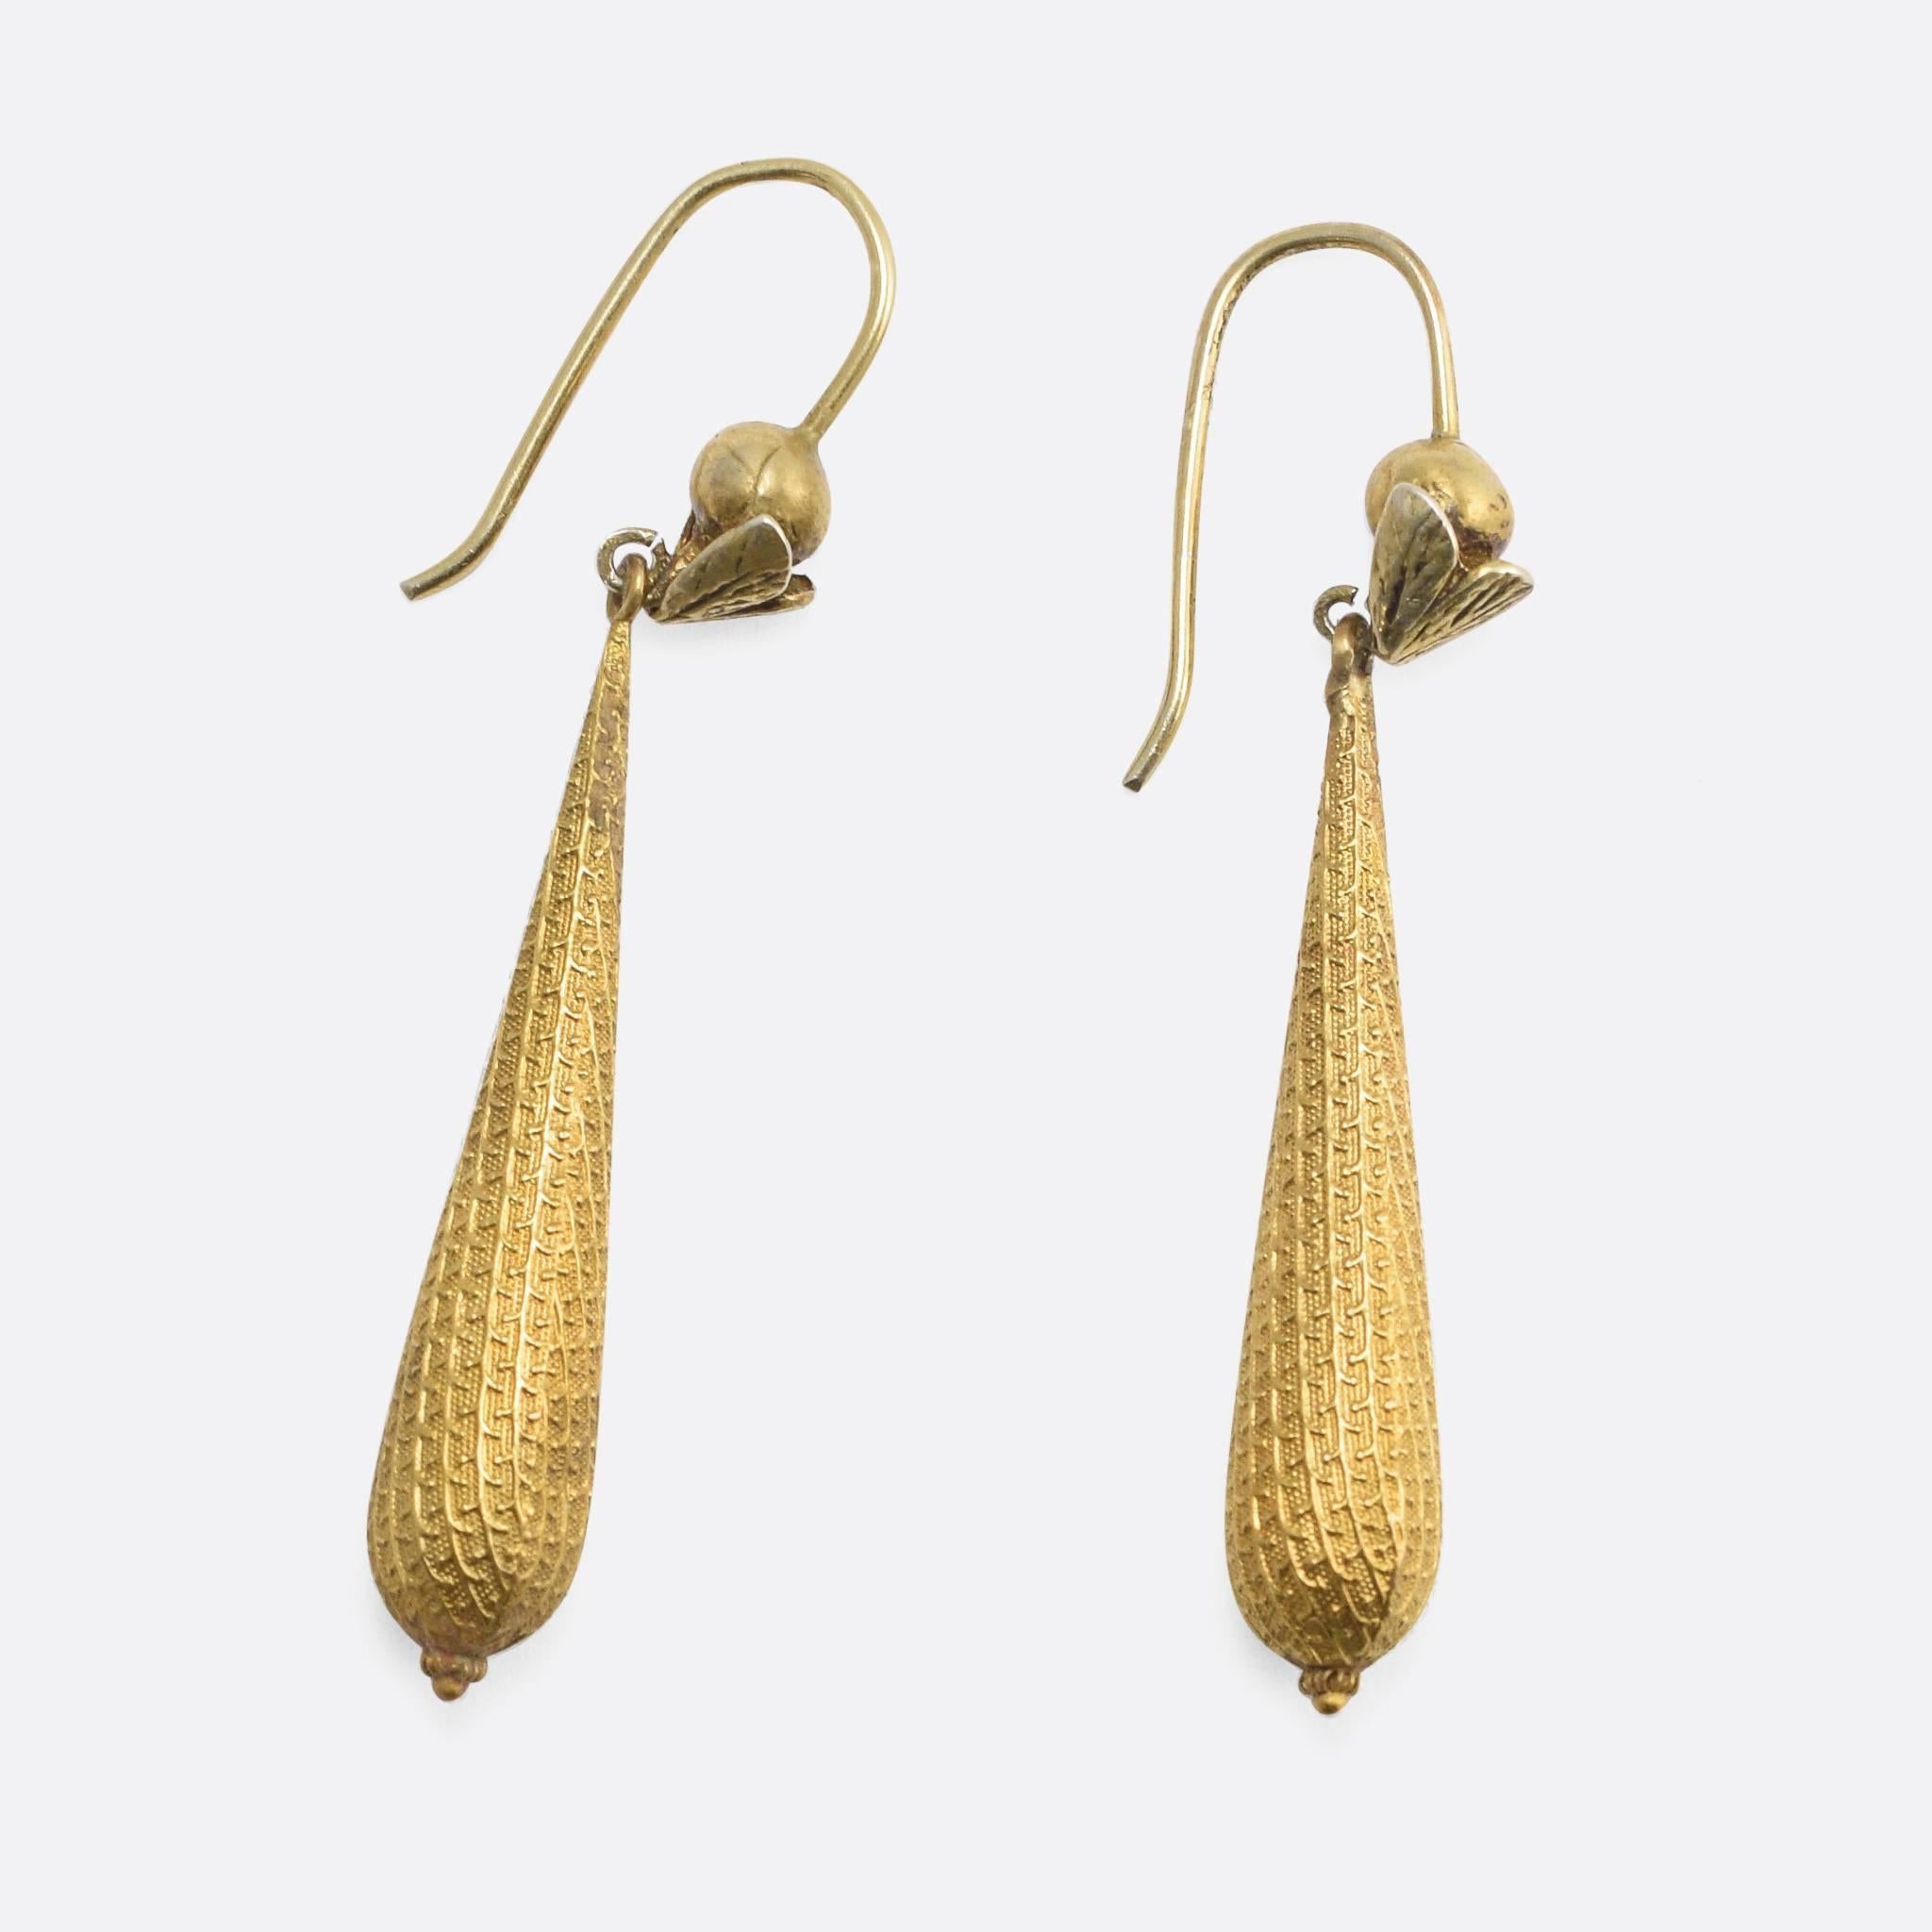 This wonderful pair of torpedo earrings is modelled in rich 15k yellow gold; they feature a finely textured surface, with a repeating stylised leaf & branch motif. The wires were likely added later, with ball tops and applied leaves. The pair remain